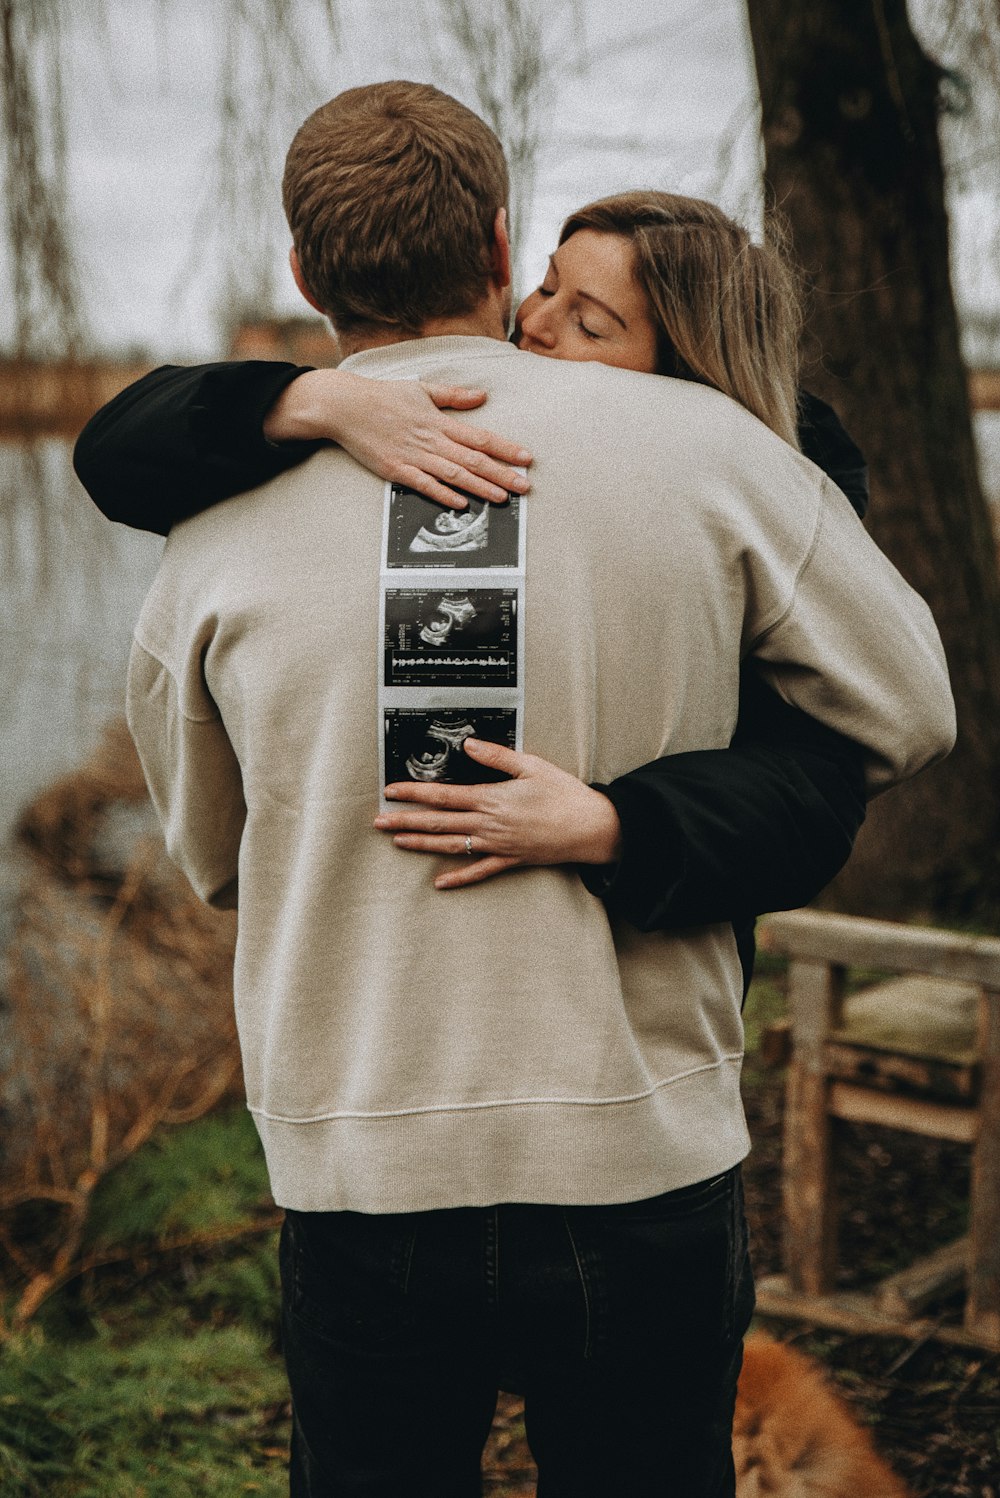 Couple With Baby Pictures | Download Free Images on Unsplash